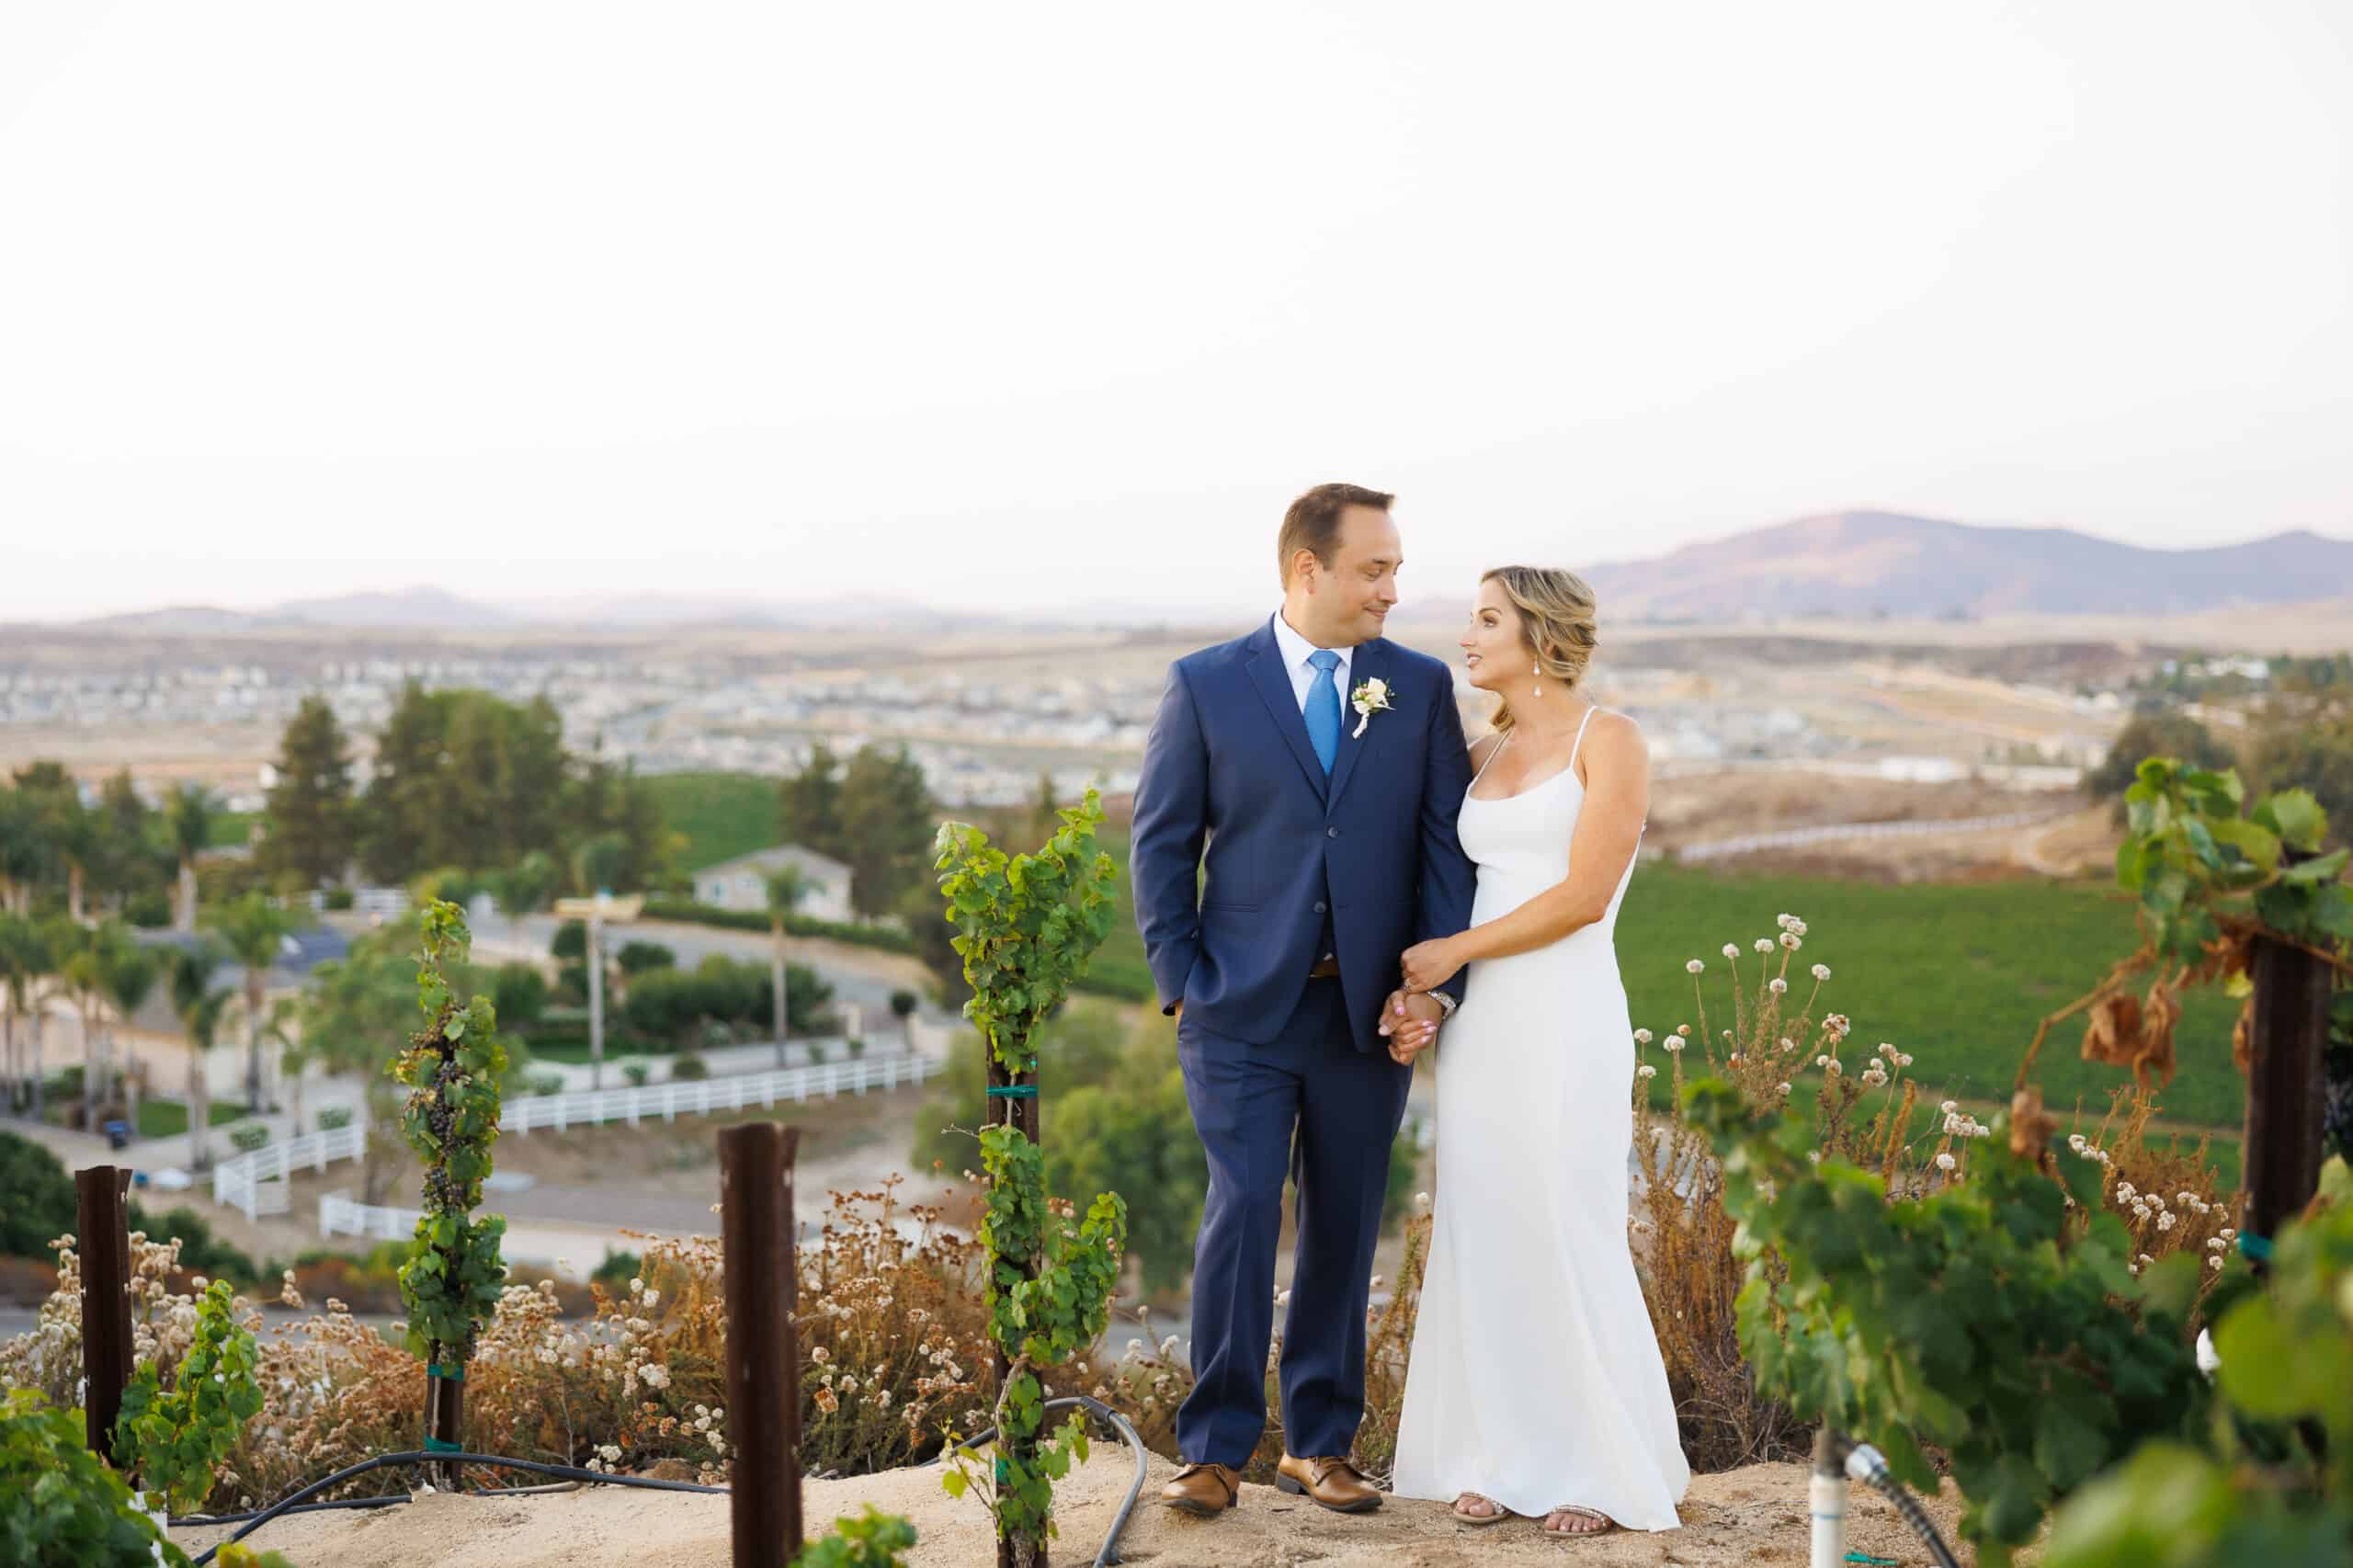 Micro Wedding Photography Packages by Courtney McManaway Photography